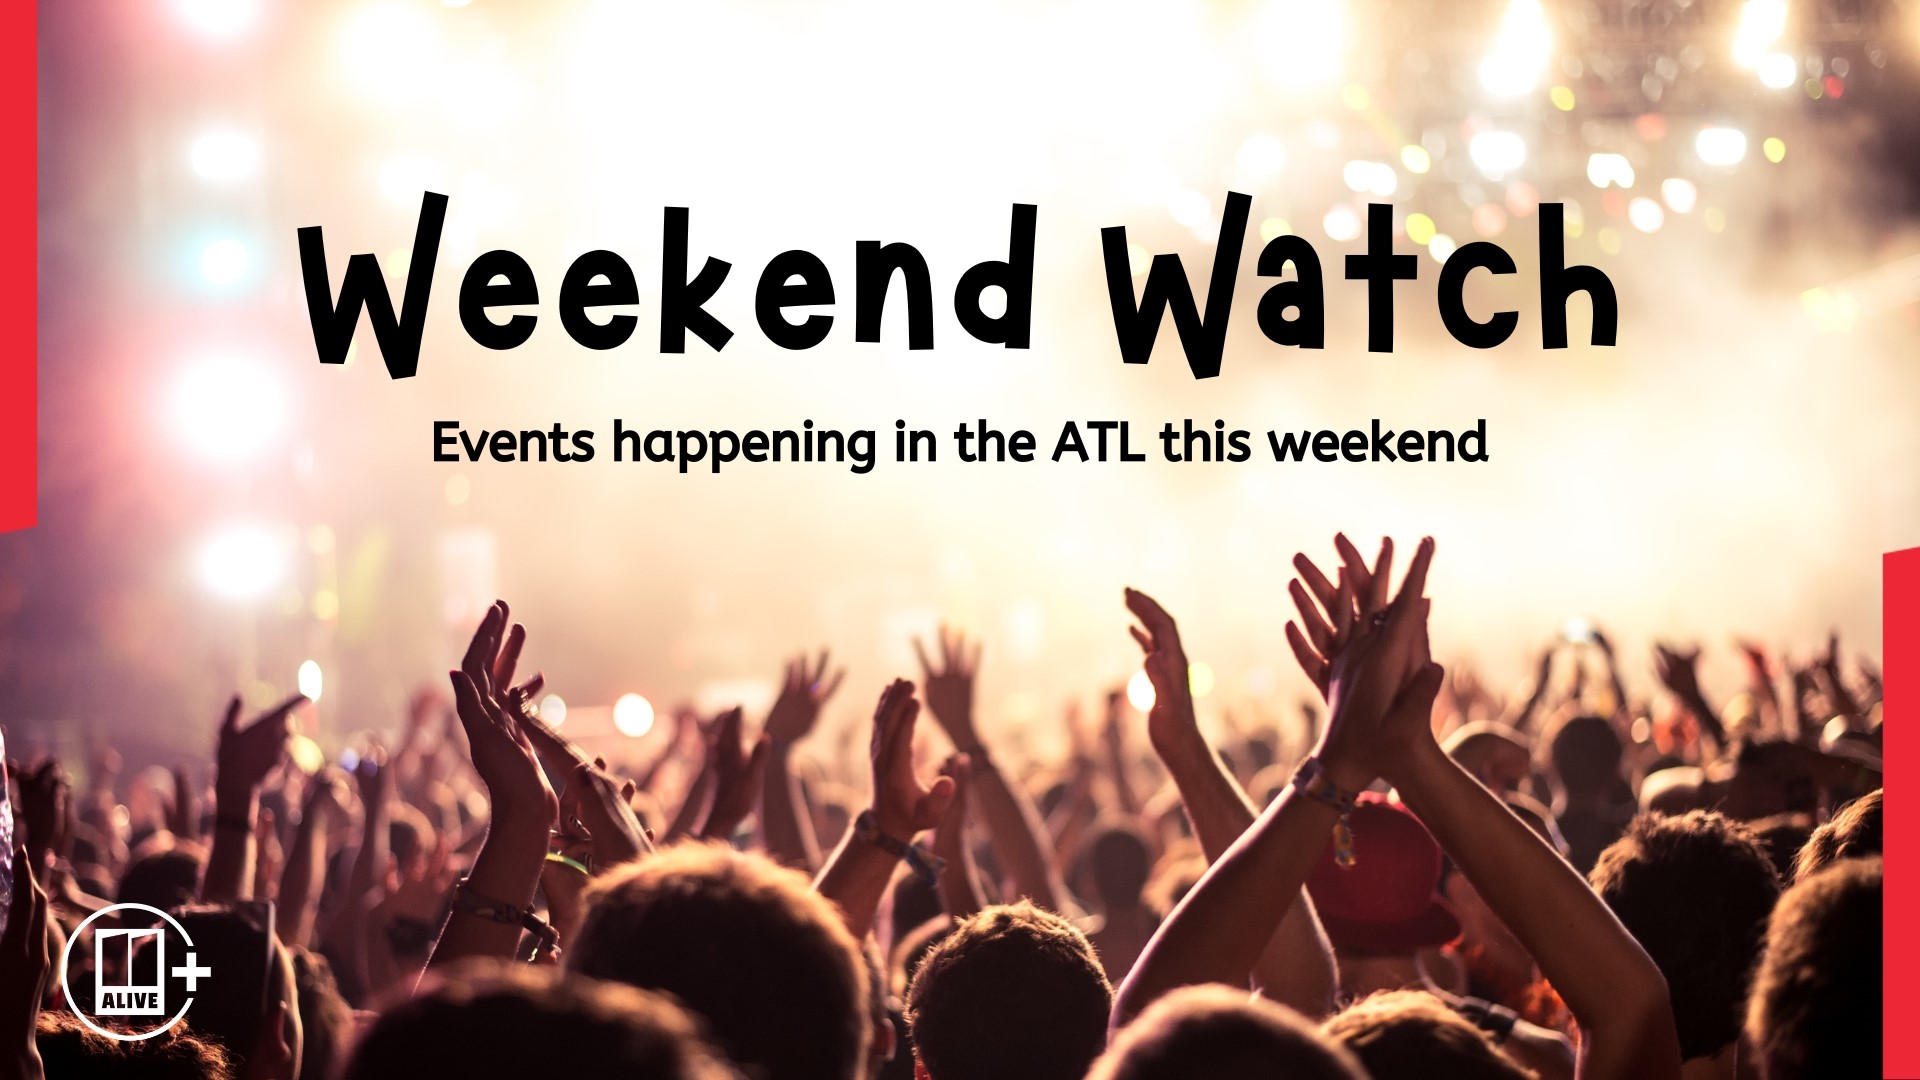 Here are some upcoming events around metro Atlanta this weekend: June 16, 17 and 18.